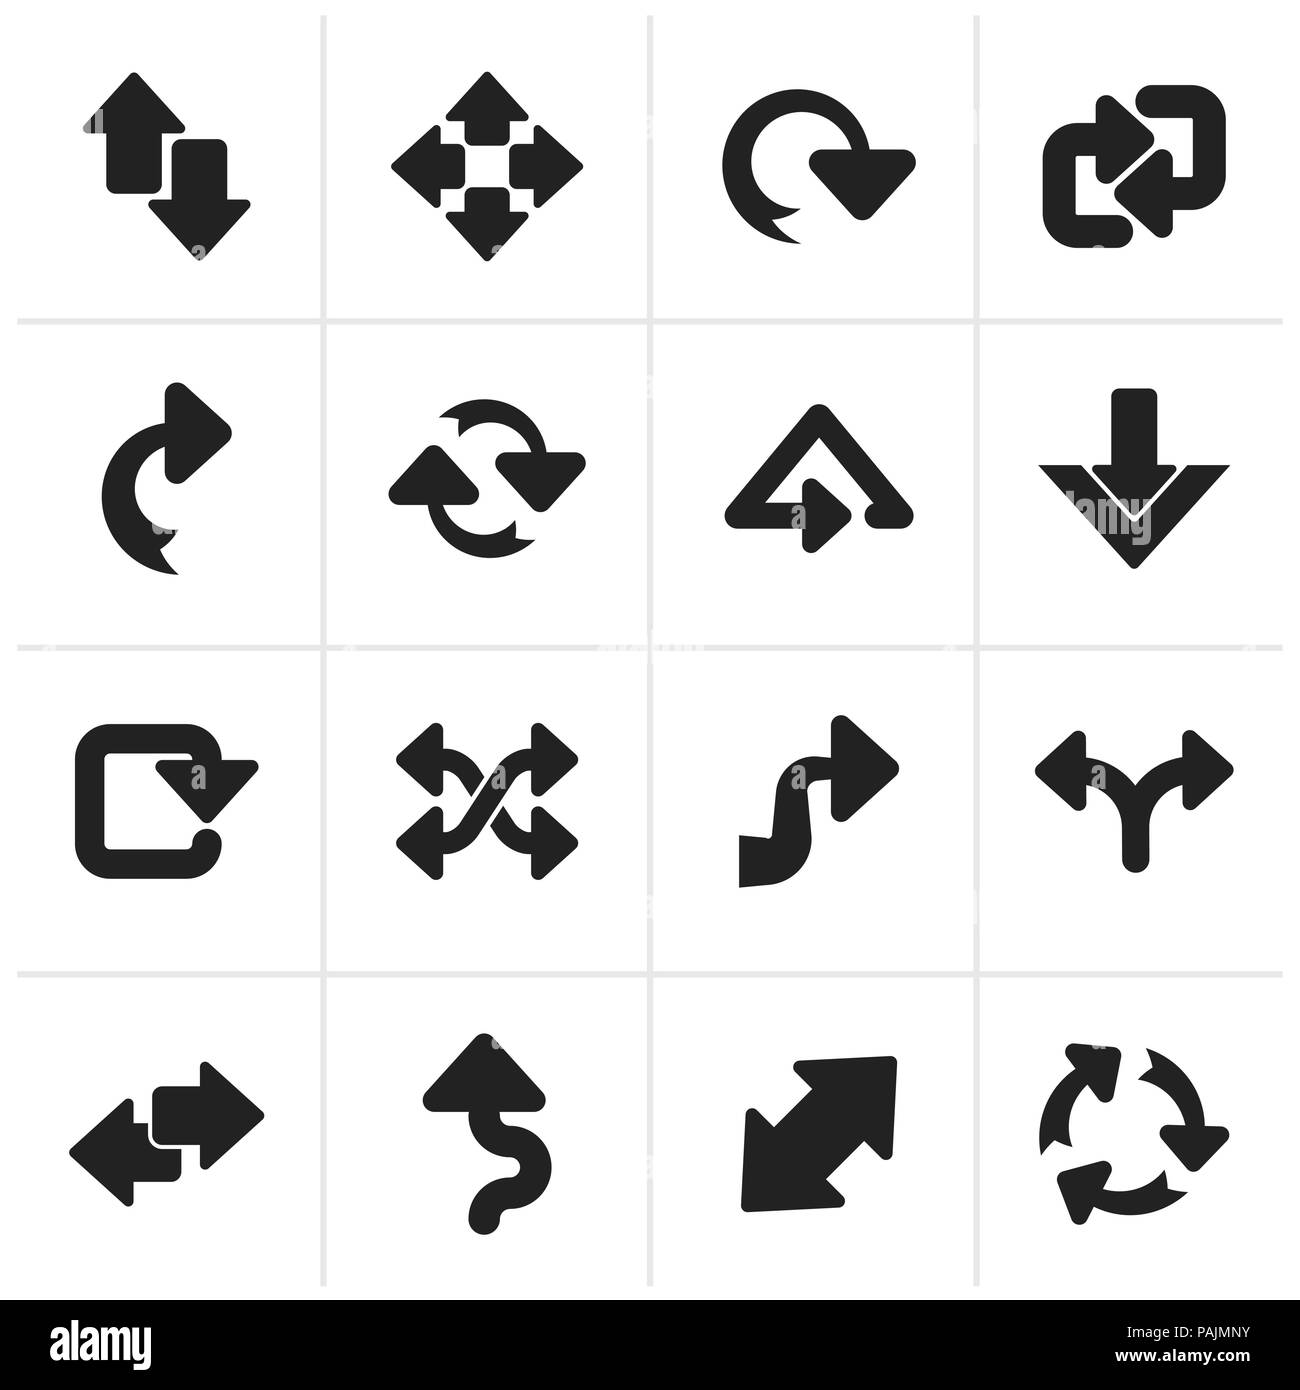 Black different kind of arrows icons - vector icon set Stock Vector